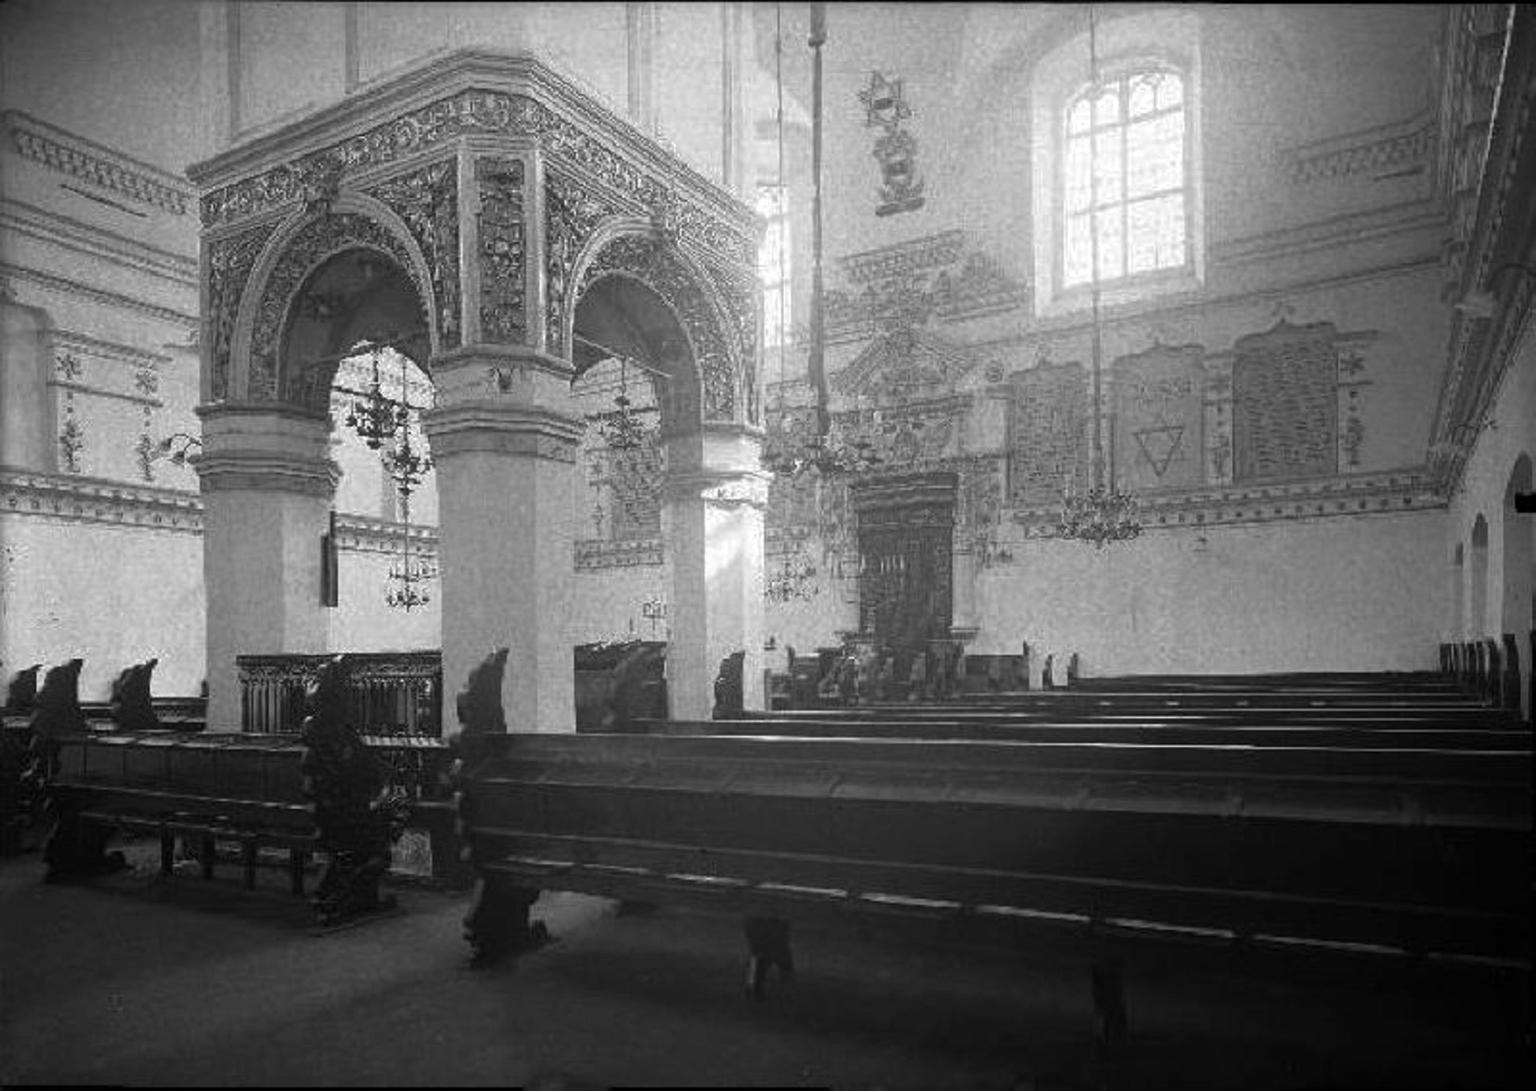 Photograph of building with central canopied platform, rows of benches, and ornate Torah ark on back wall. 